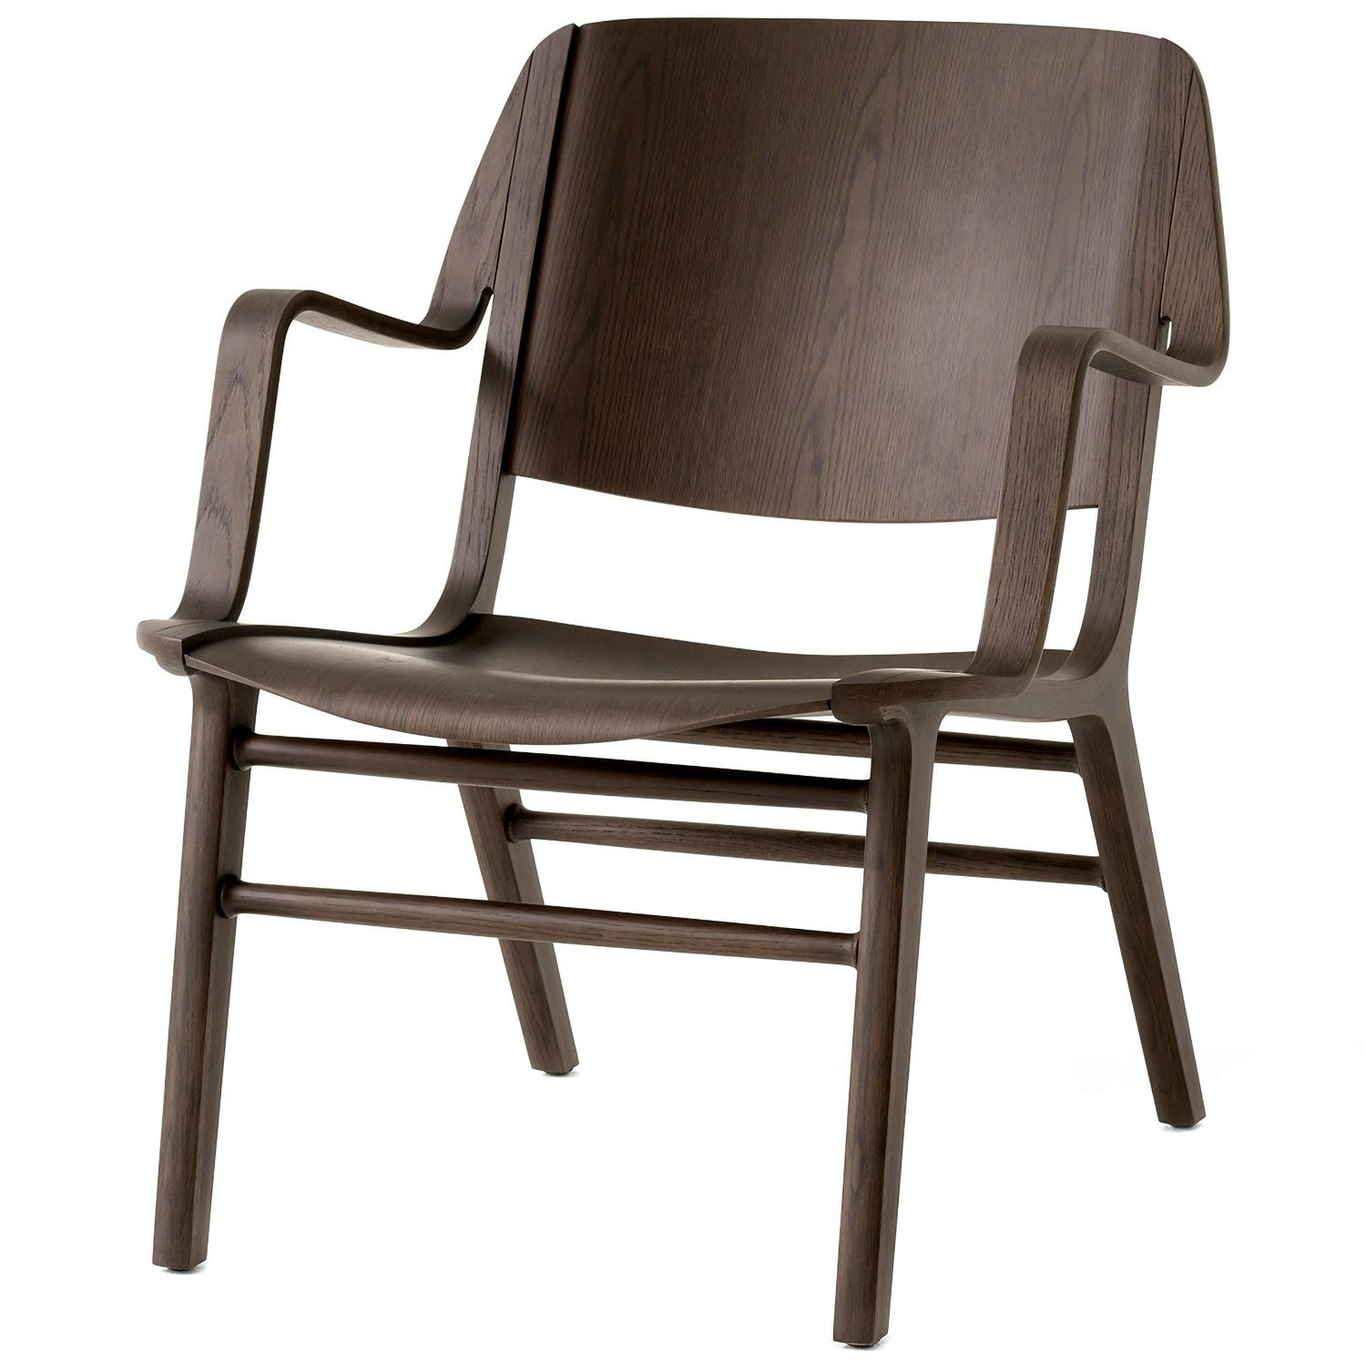 AX HM11 Lounge Chair, Dark Stained Oak